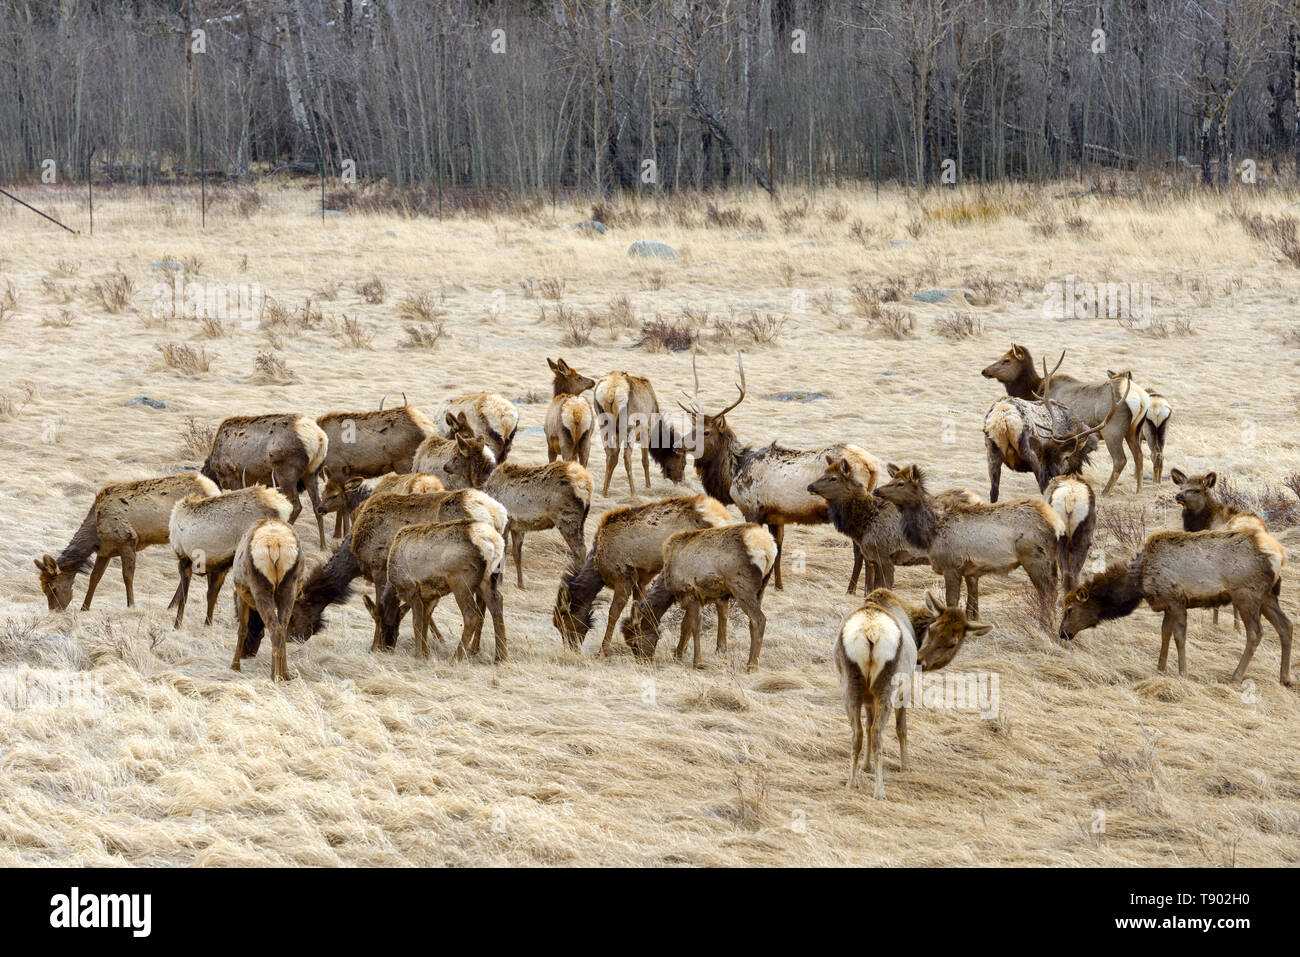 Spring Elk - A big herd of elk resting and grazing on a dry grass field. Early Spring in Rocky Mountain National Park, Colorado, USA. Stock Photo